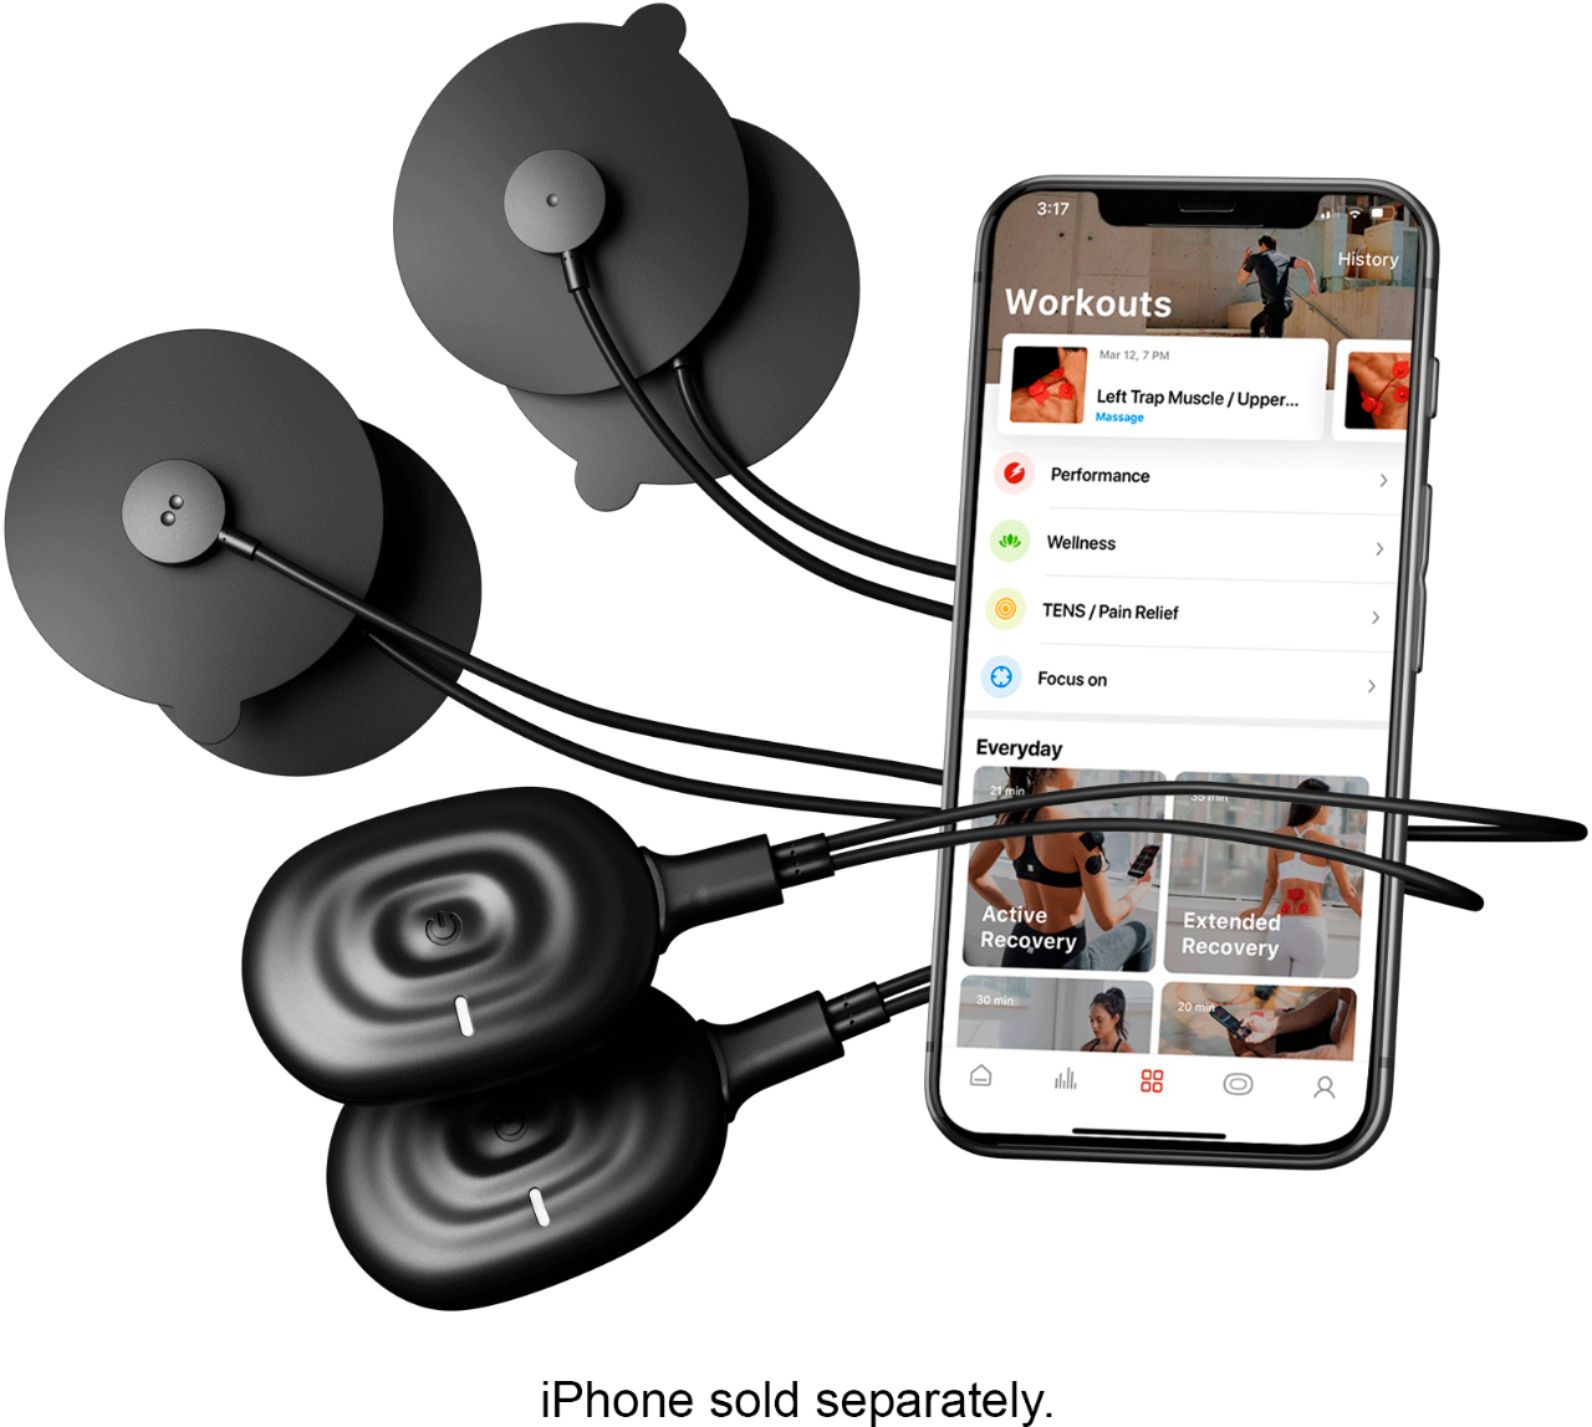 PowerDot Muscle Stimulation Devices